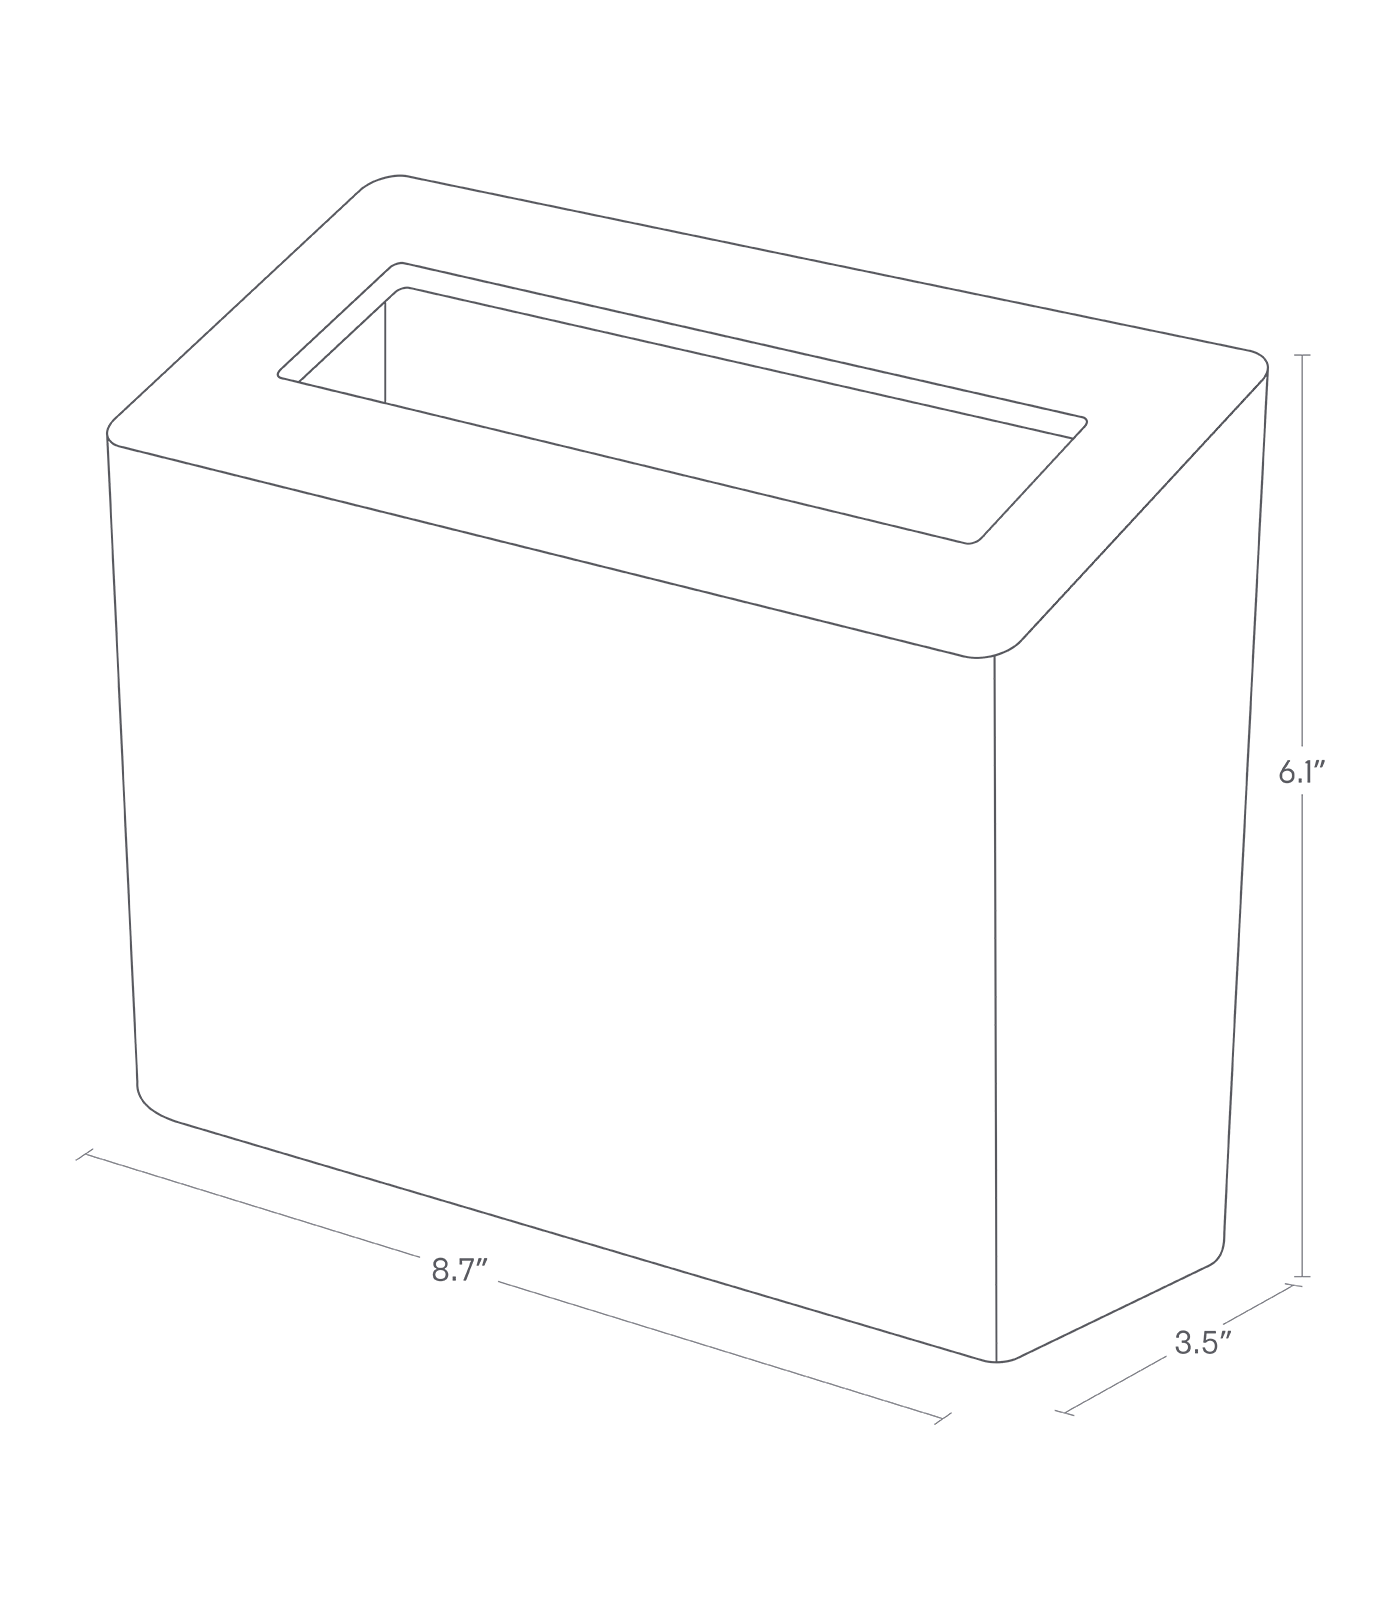 Dimension image for Countertop Waste Bin on a white background including dimensions  L 3.54 x W 8.66 x H 6.1 inches